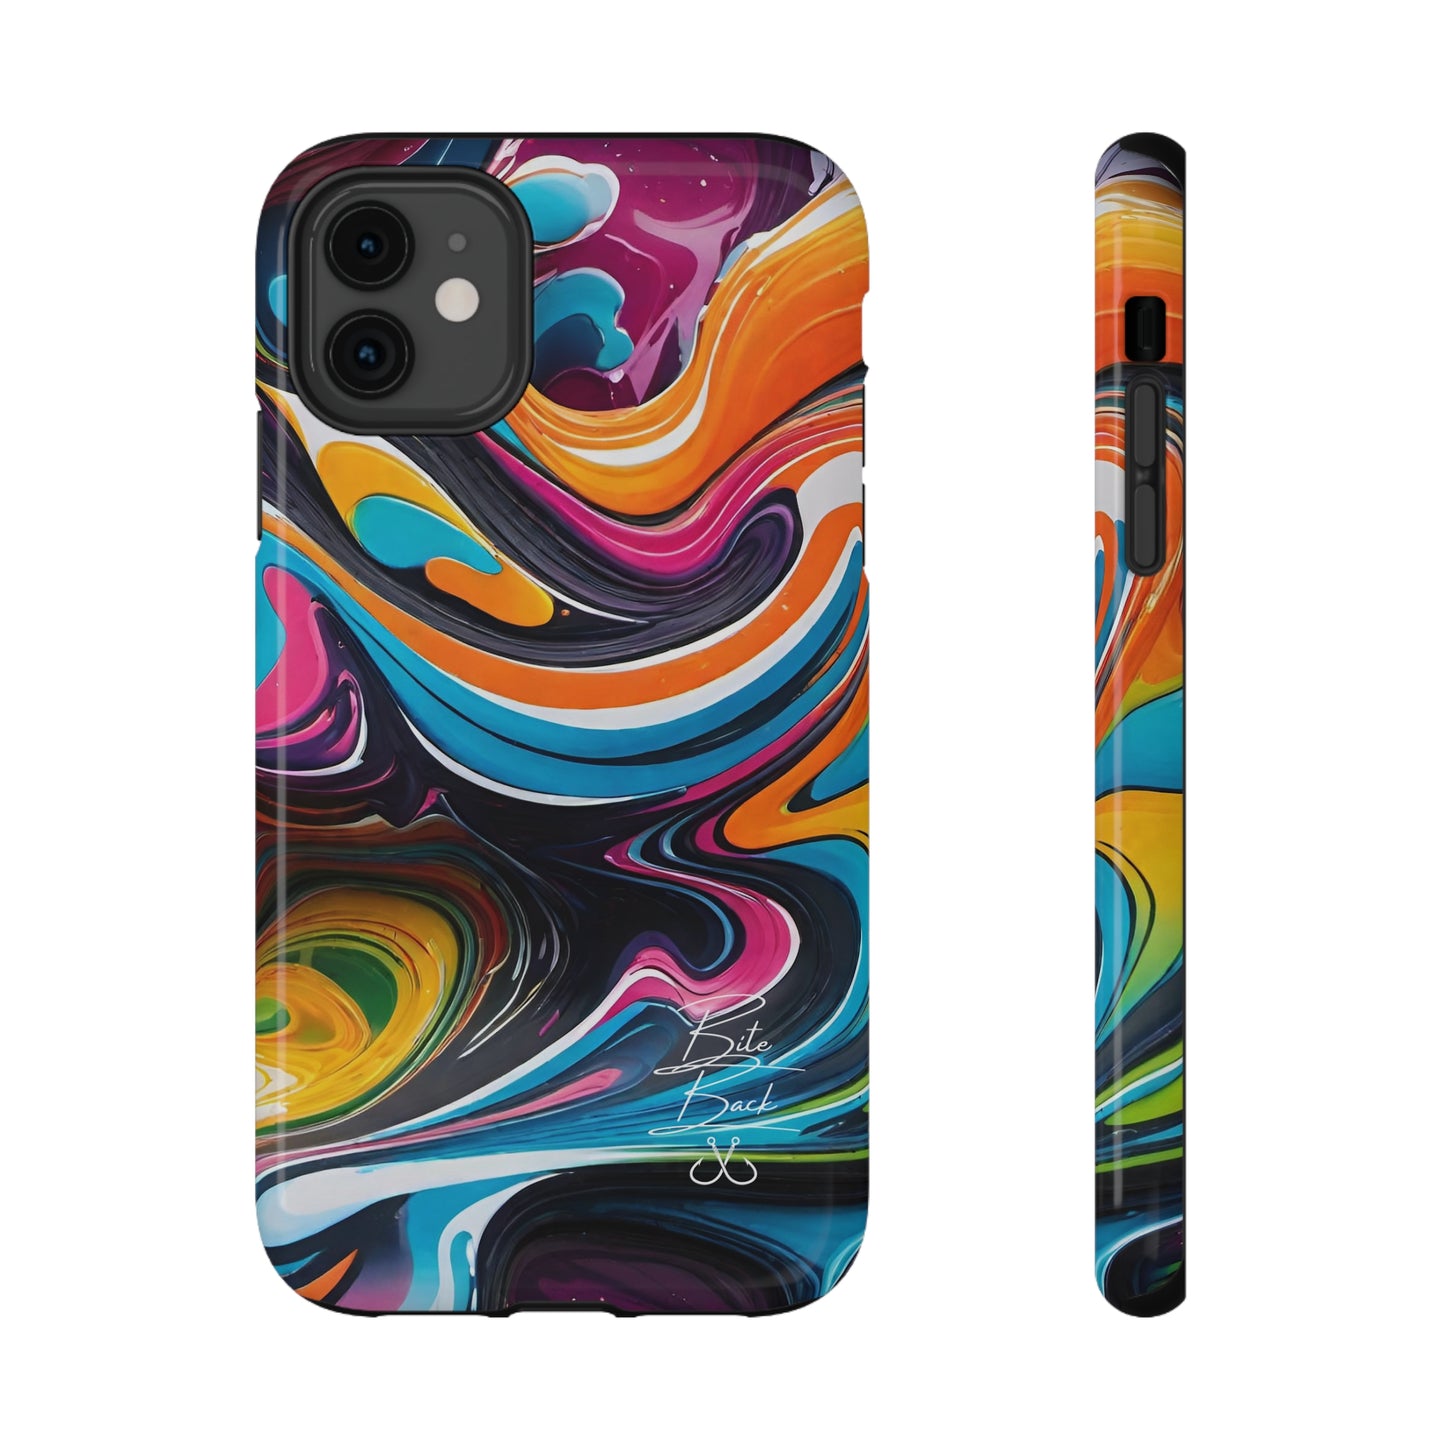 Colorful Impact-Resistant Cases